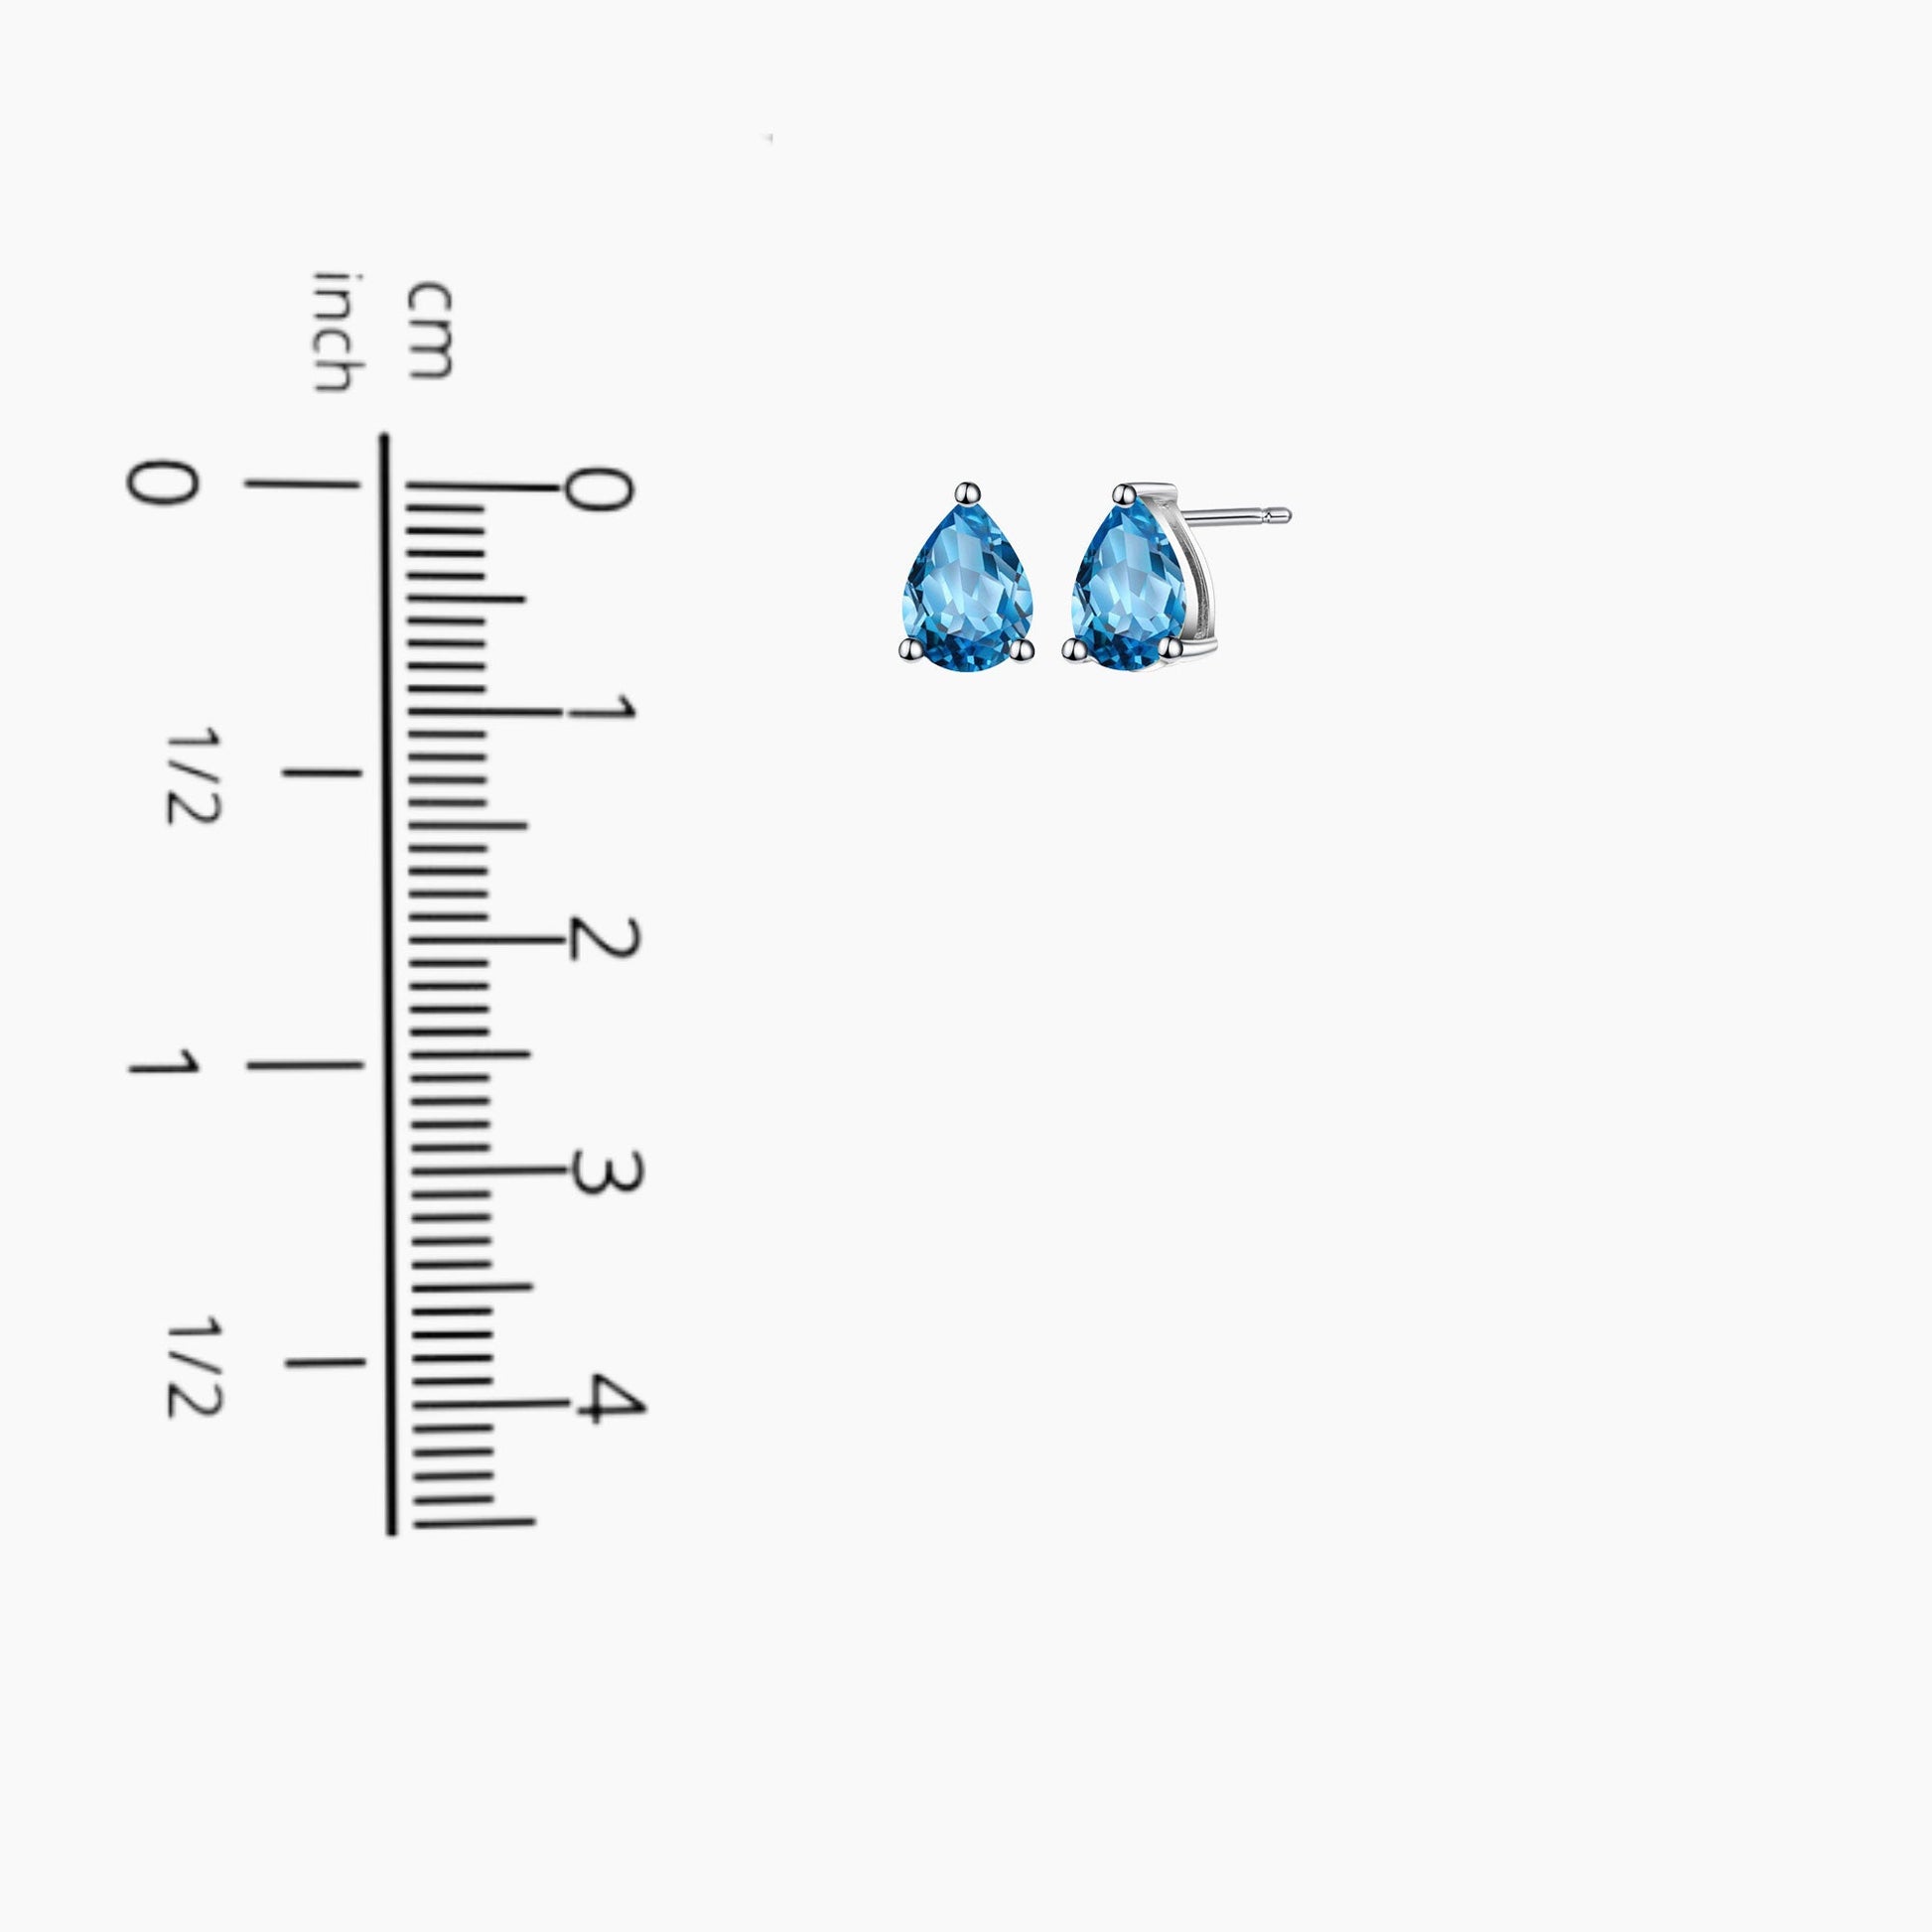 Swiss Blue Topaz Pear Stud Earrings displayed next to a scale for size comparison